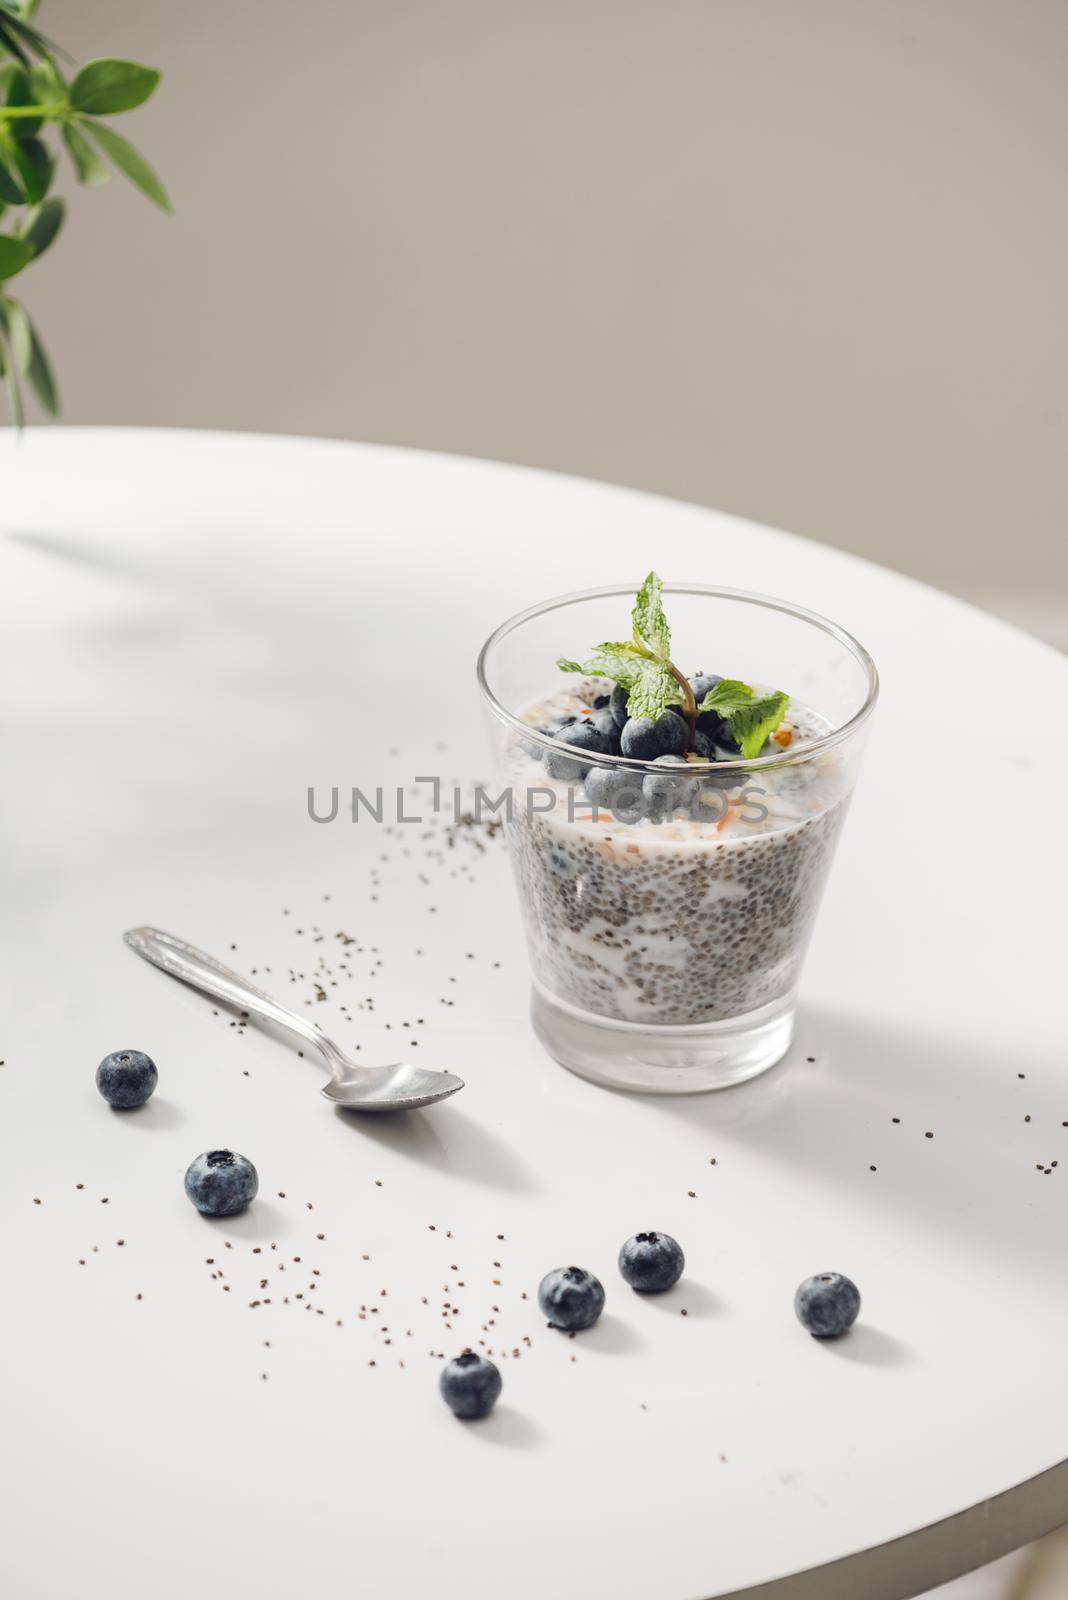 Healthy breakfast or morning snack with chia seeds vanilla pudding and berries on wooden background, vegetarian food, diet and health concept